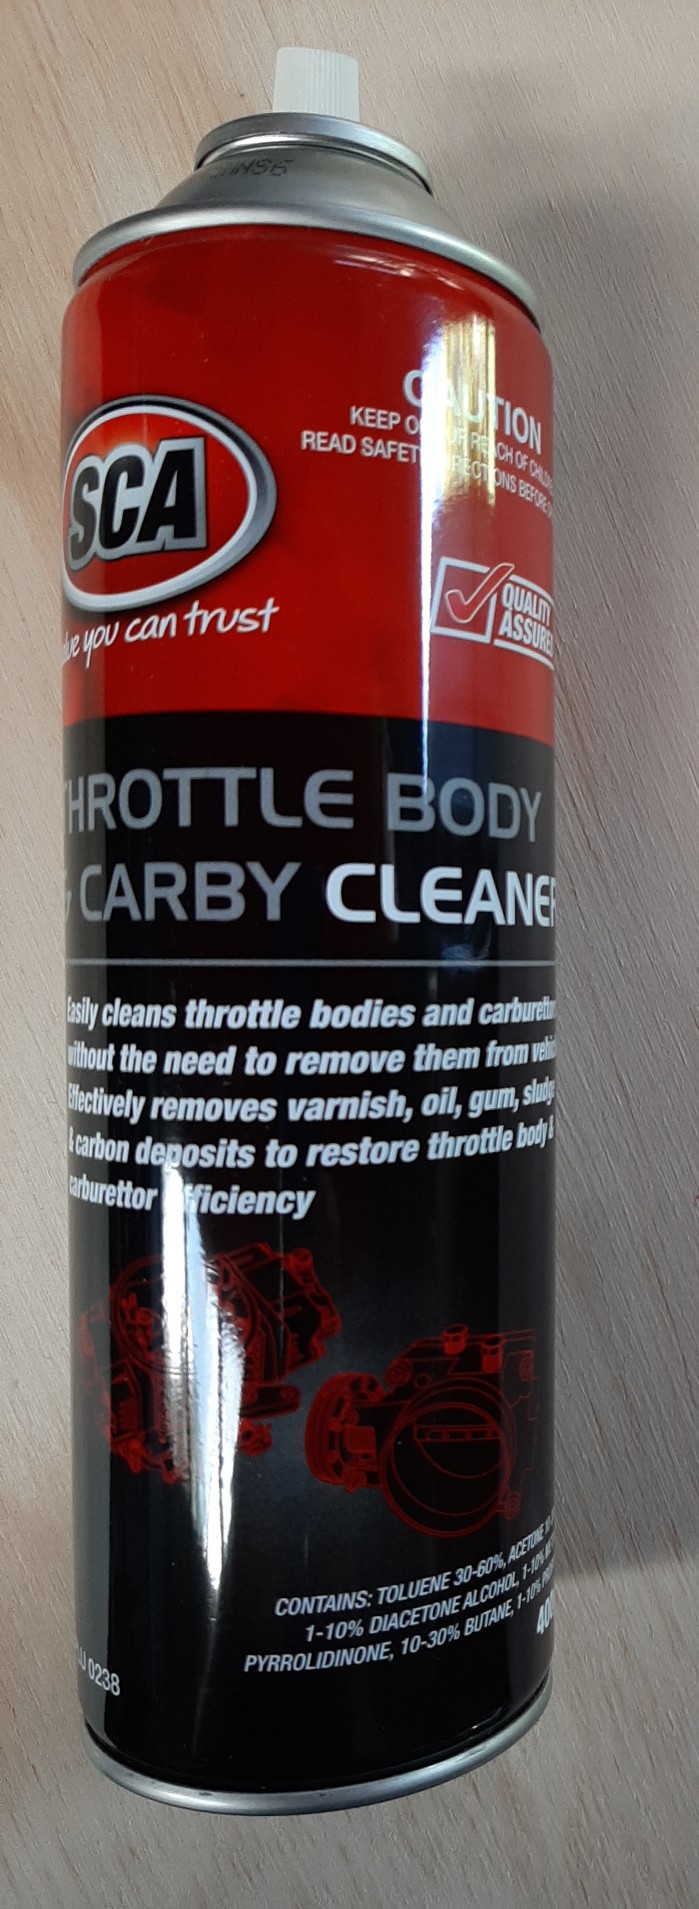 Carby cleaner.jpeg